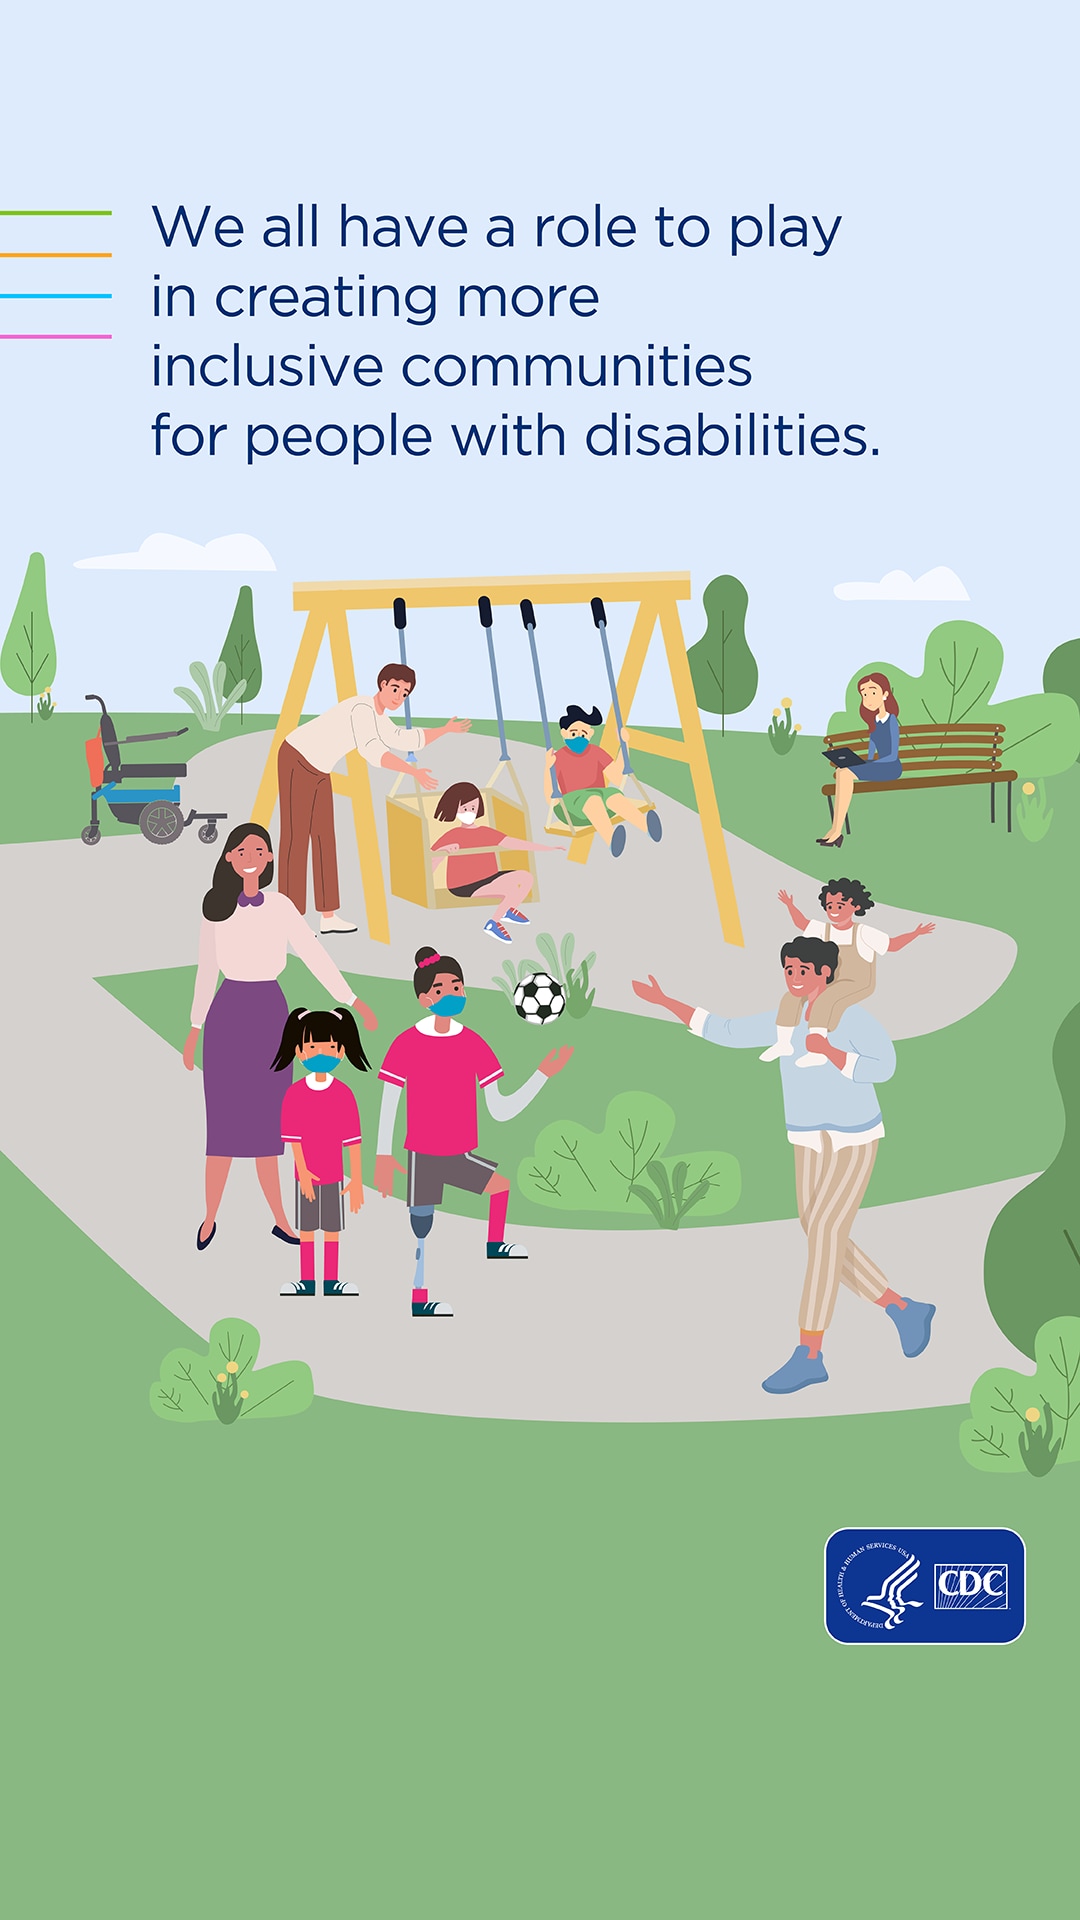 Illustration of a playground with various equipment that is accessible for all, and several people and children enjoying the space. The graphic shows children swinging, a woman working on her laptop on a bench, a father with his child on his shoulders, and a mother taking her two daughters to a soccer game, one daughter has a prosthetic leg. CDC logo